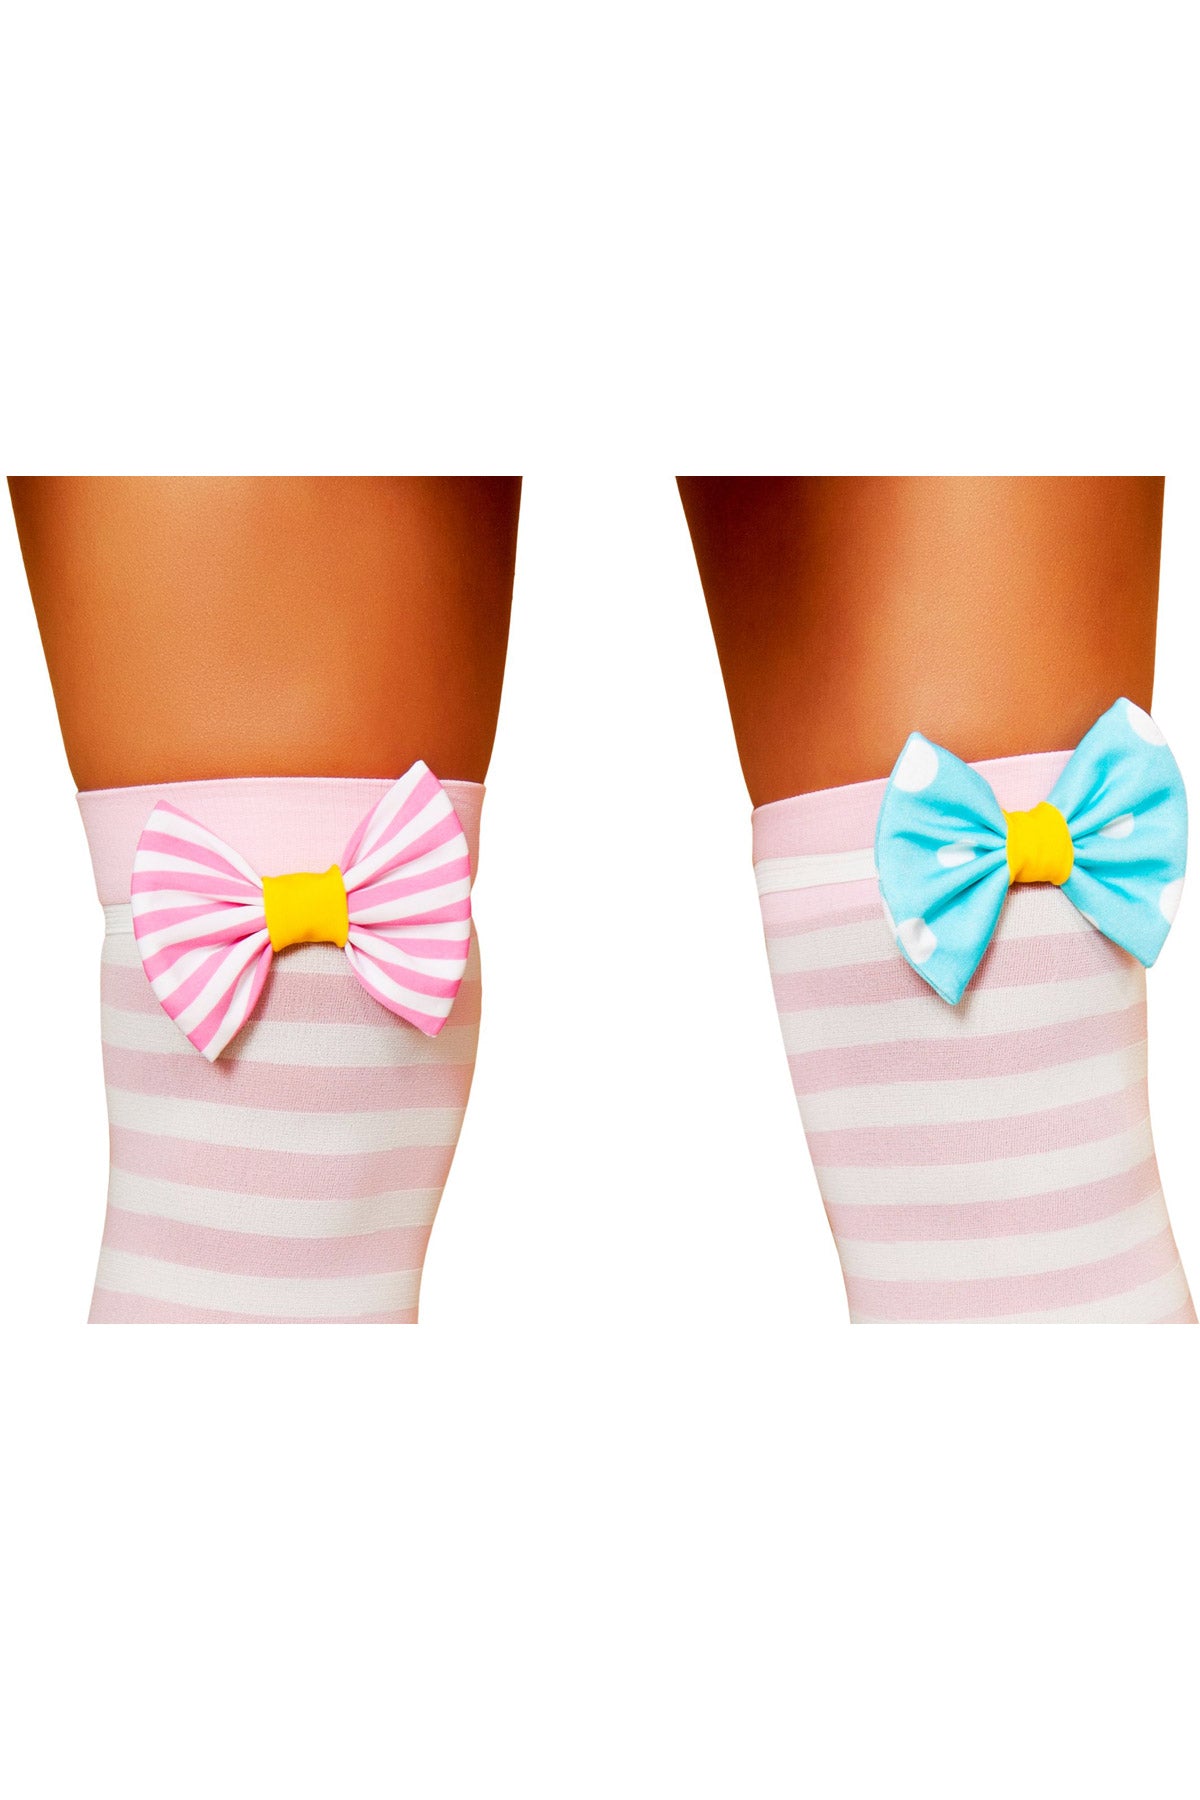 Lady Laughter Stocking Bows Costume Accessory Roma 4421B